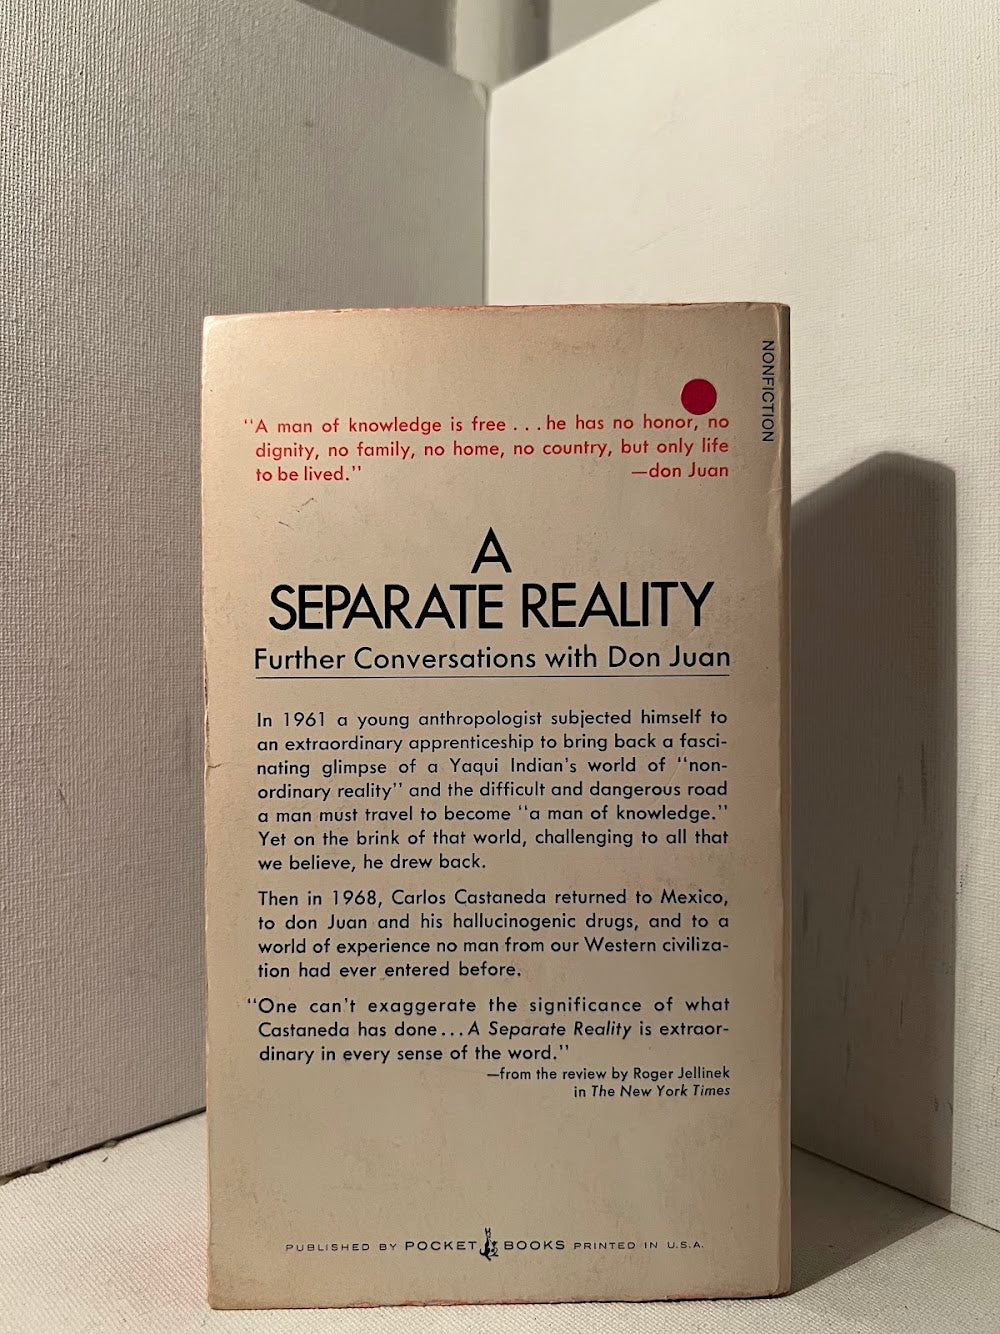 A Separate Reality by Carlos Castaneda